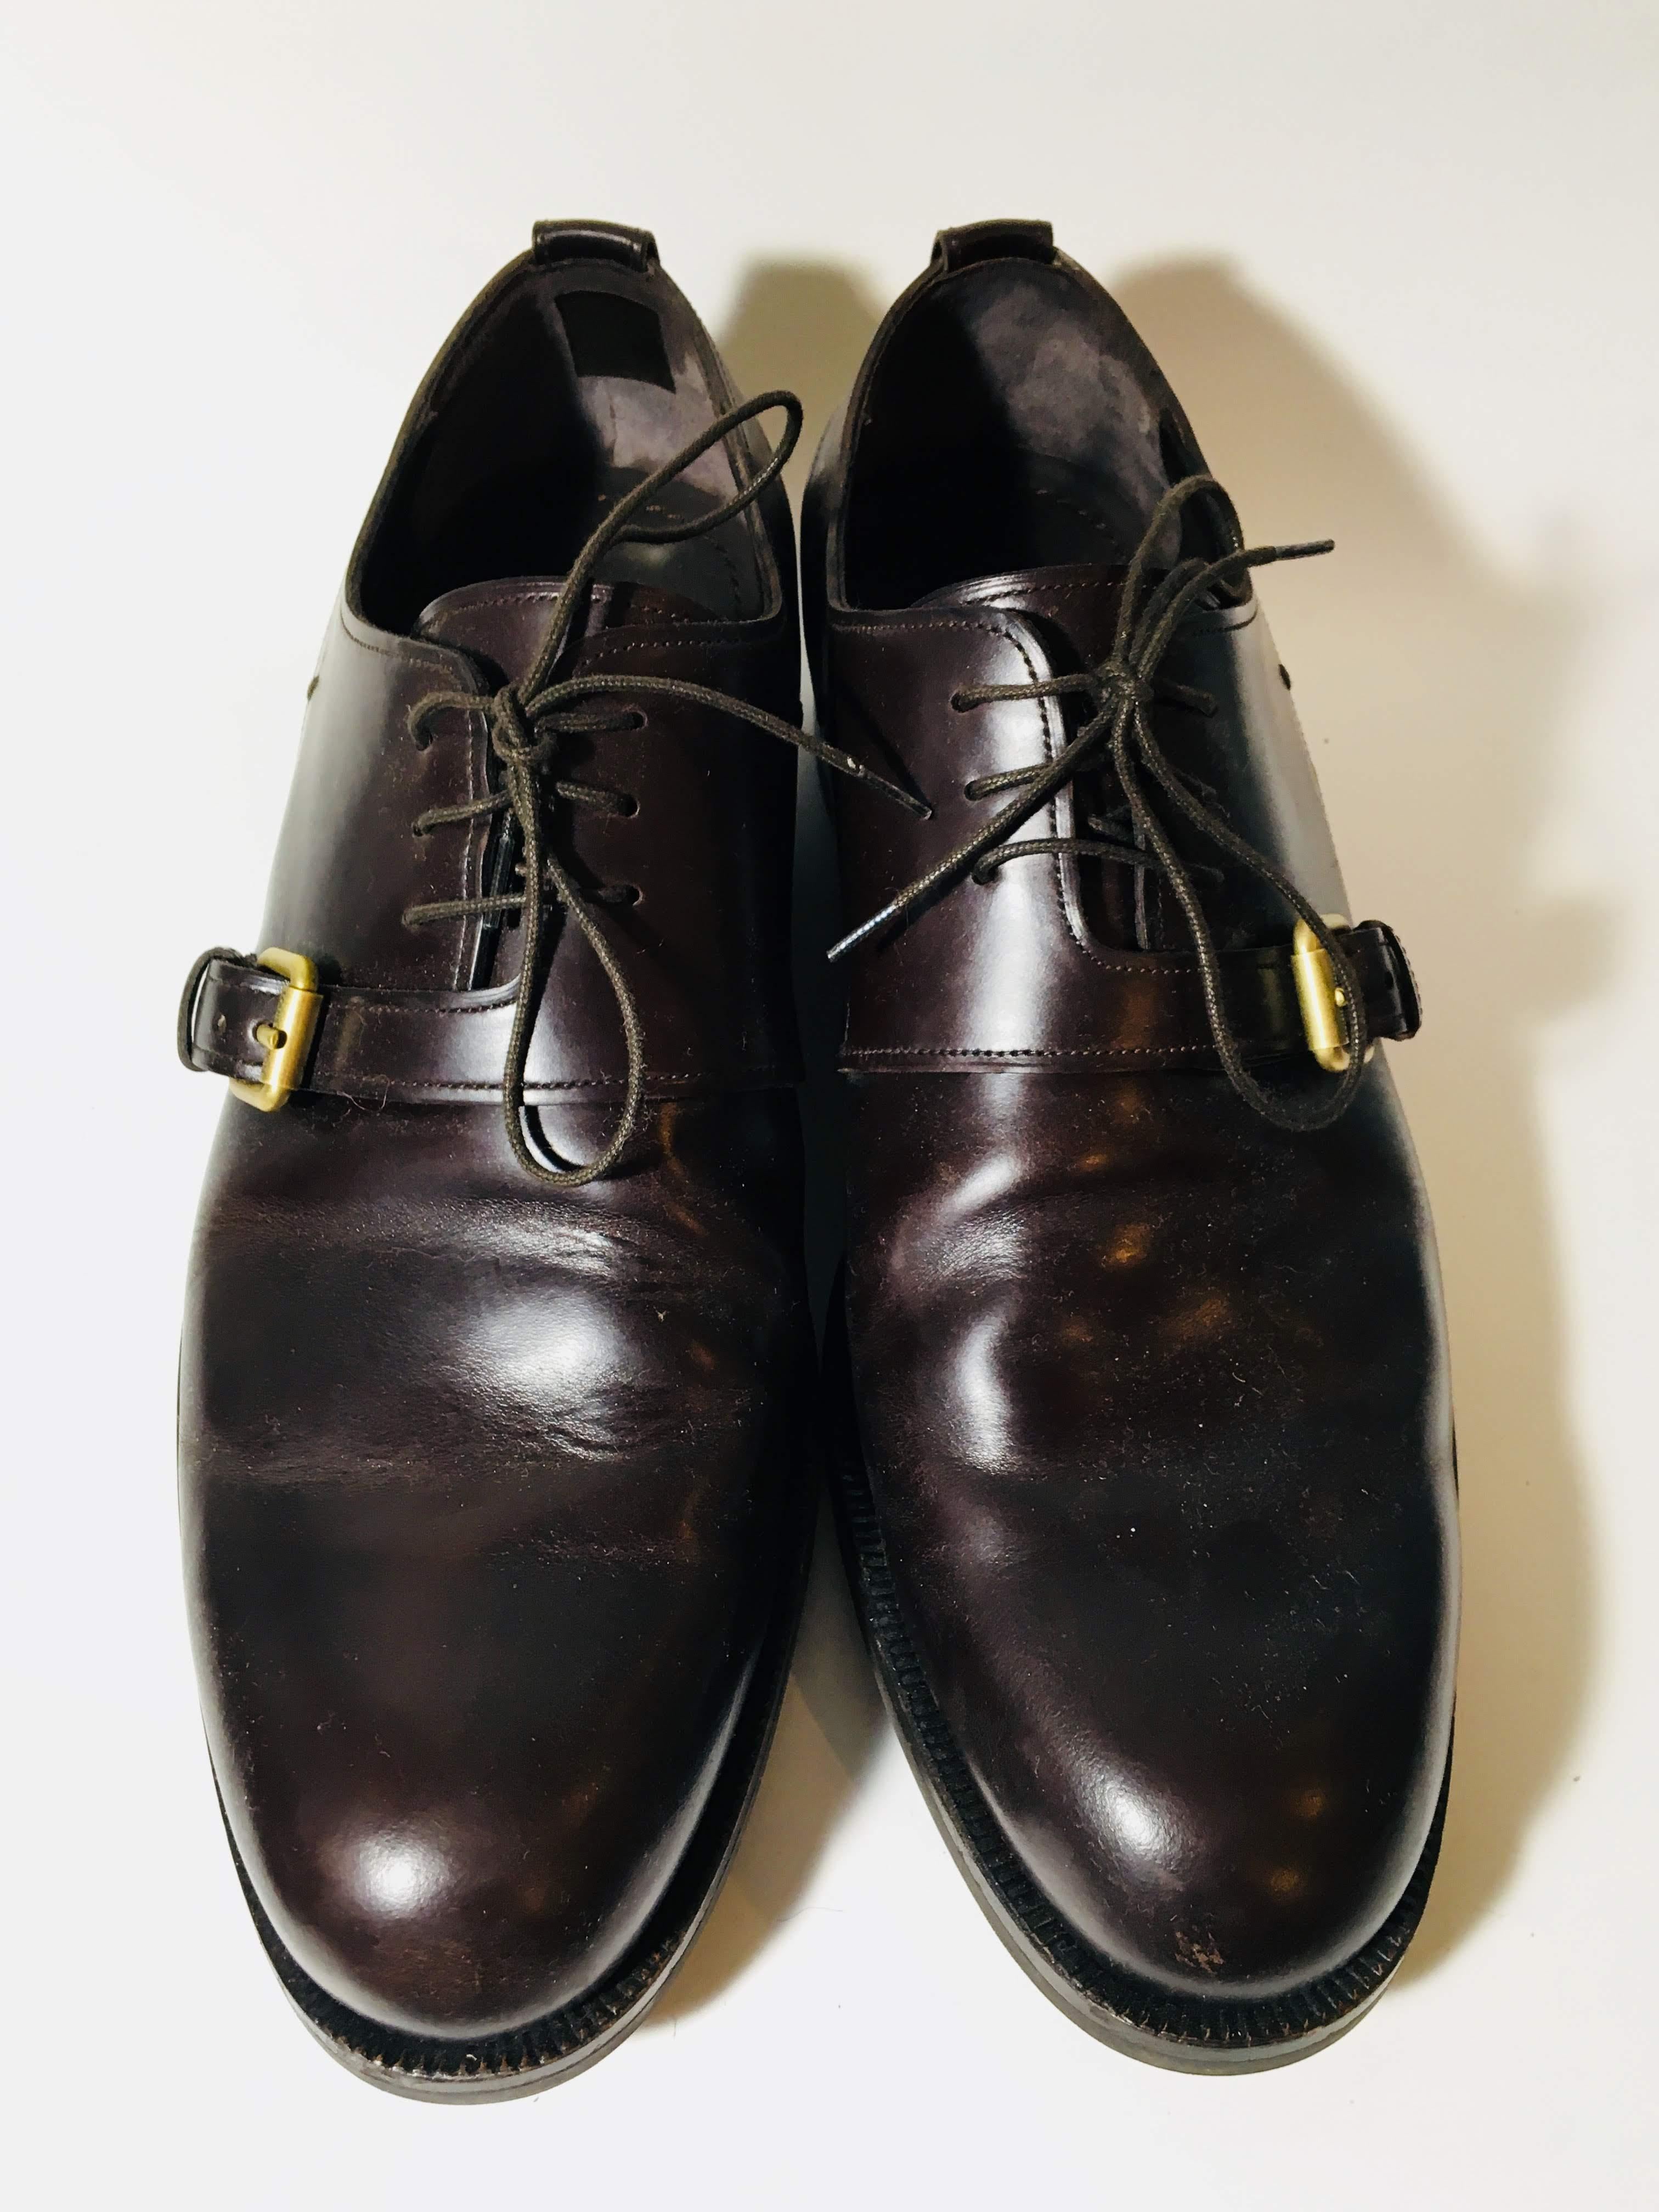 Brown Leather Louis Vuitton Dress Shoes. Lace up with Gold Buckle. 